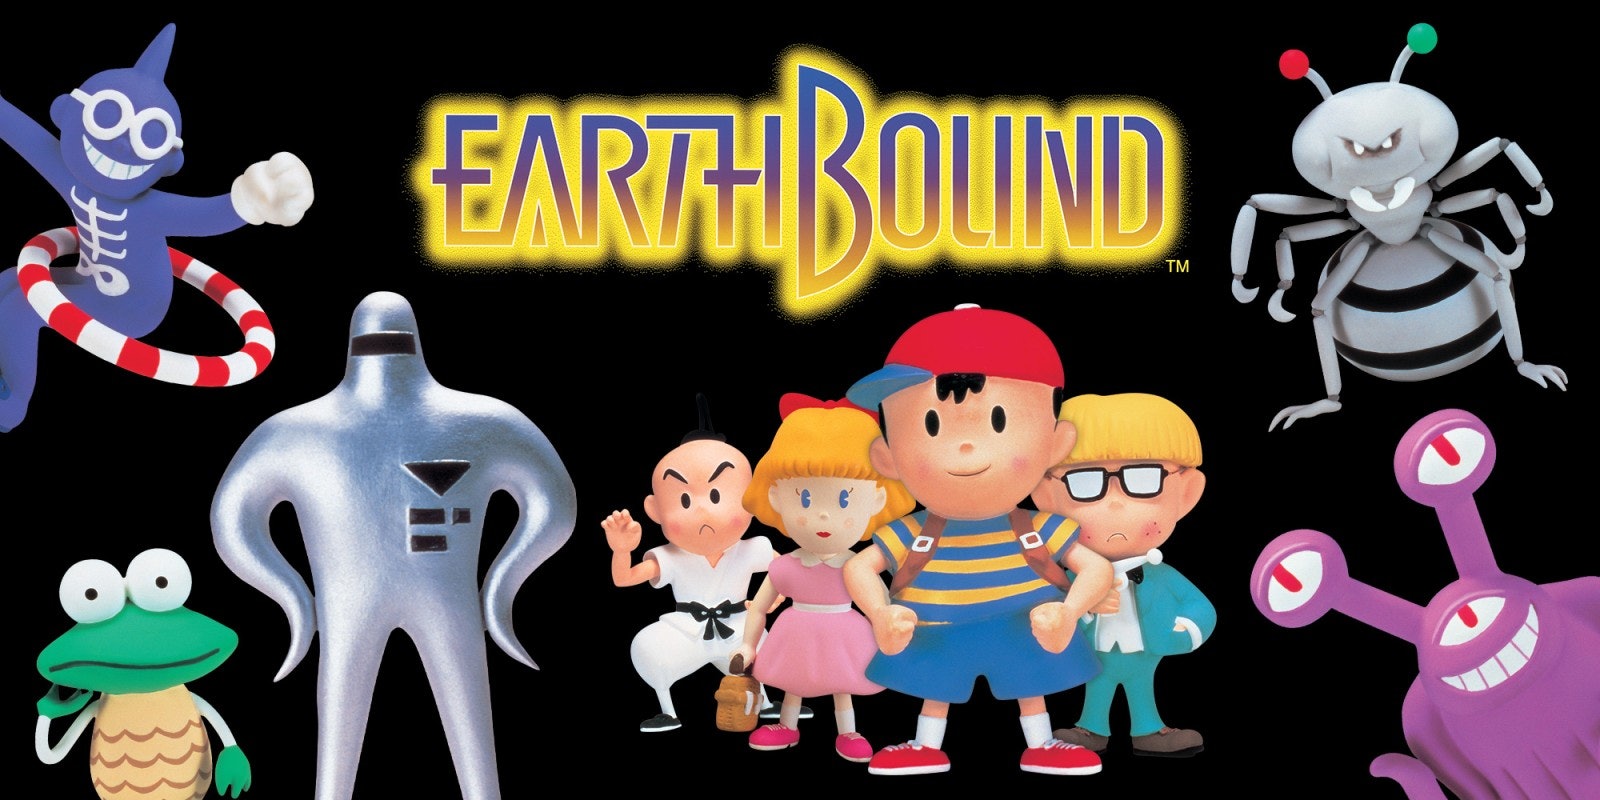 earthbound coming to switch